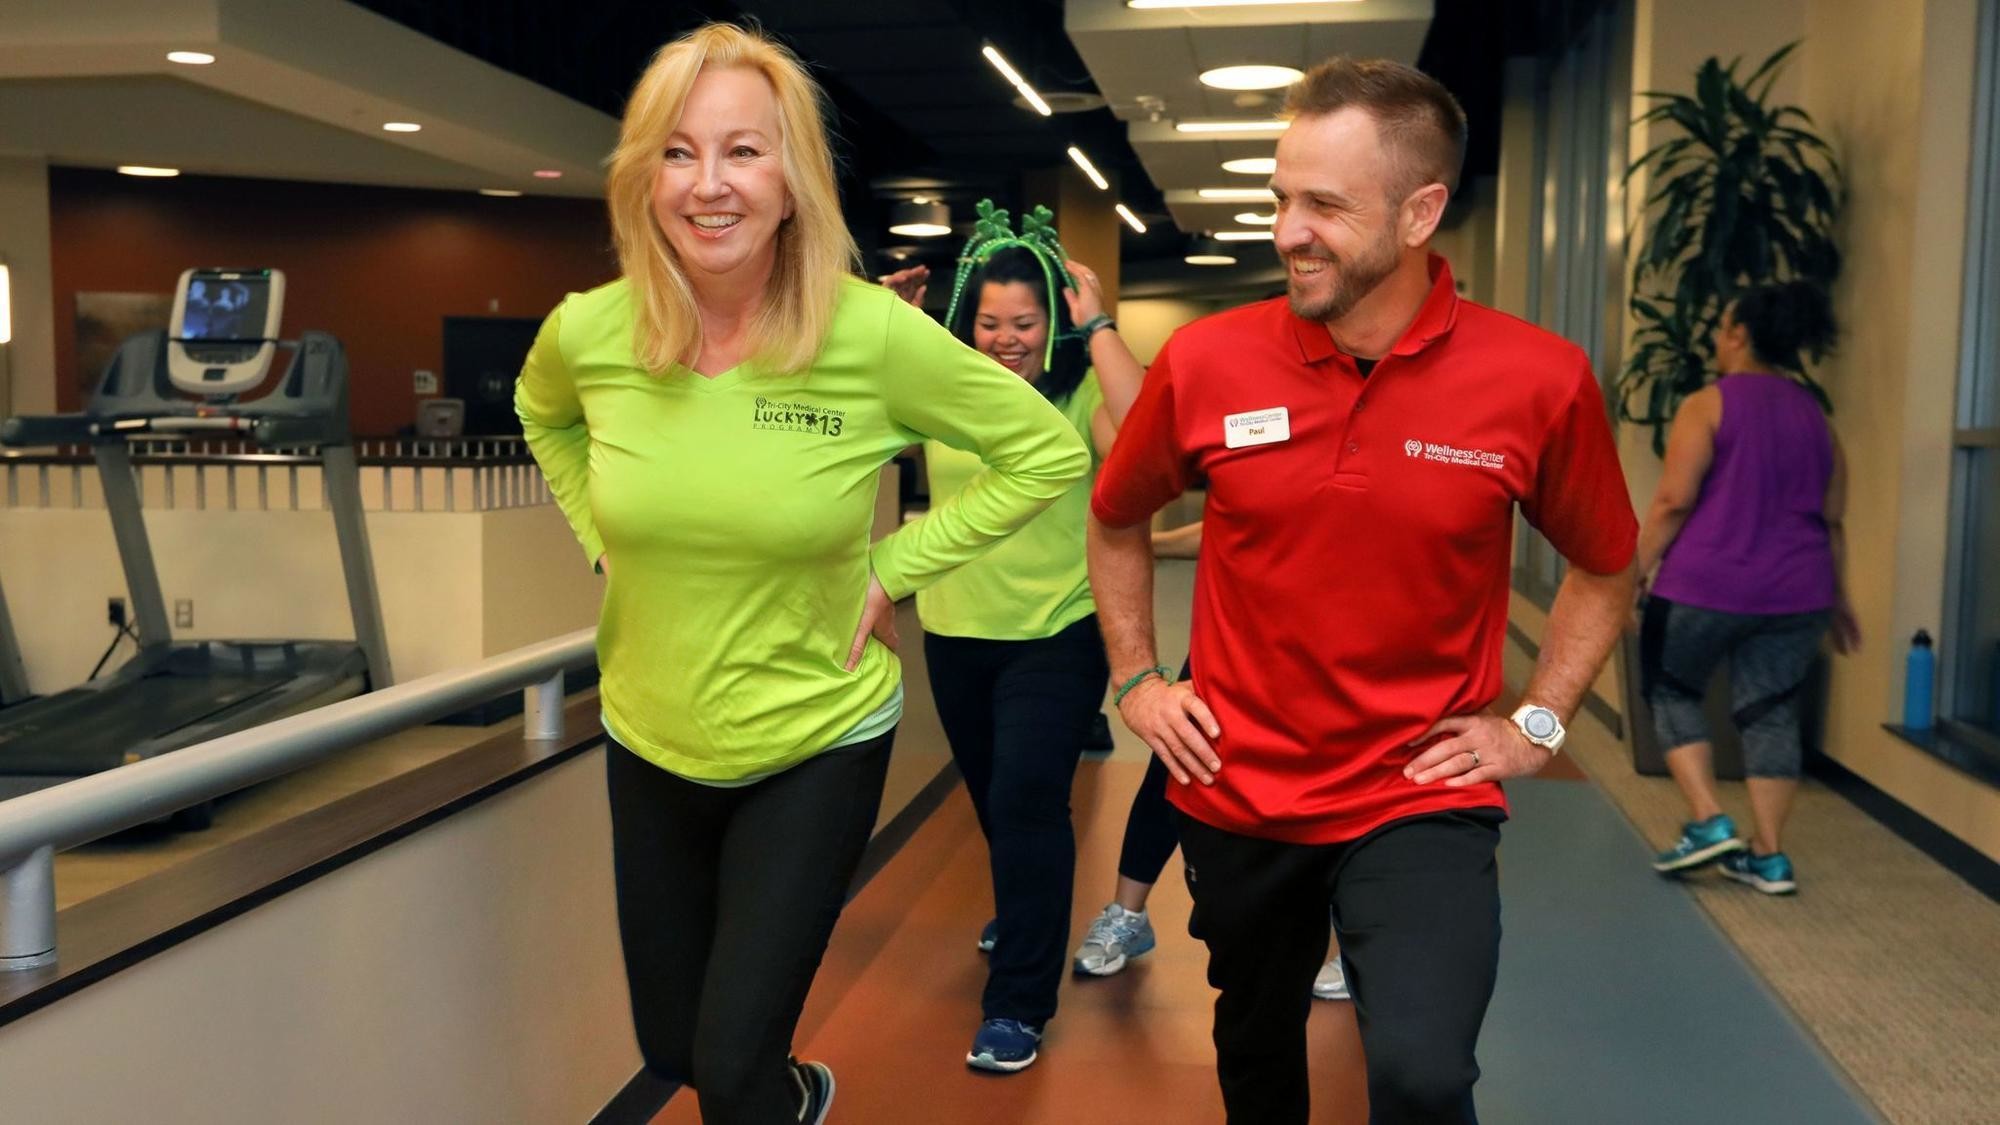 Beth Thorp suffered a brain seizure that paralyzed her right side but on Sunday she plans to finish the Tri-City Medical Center Carlsbad Half-Marathon